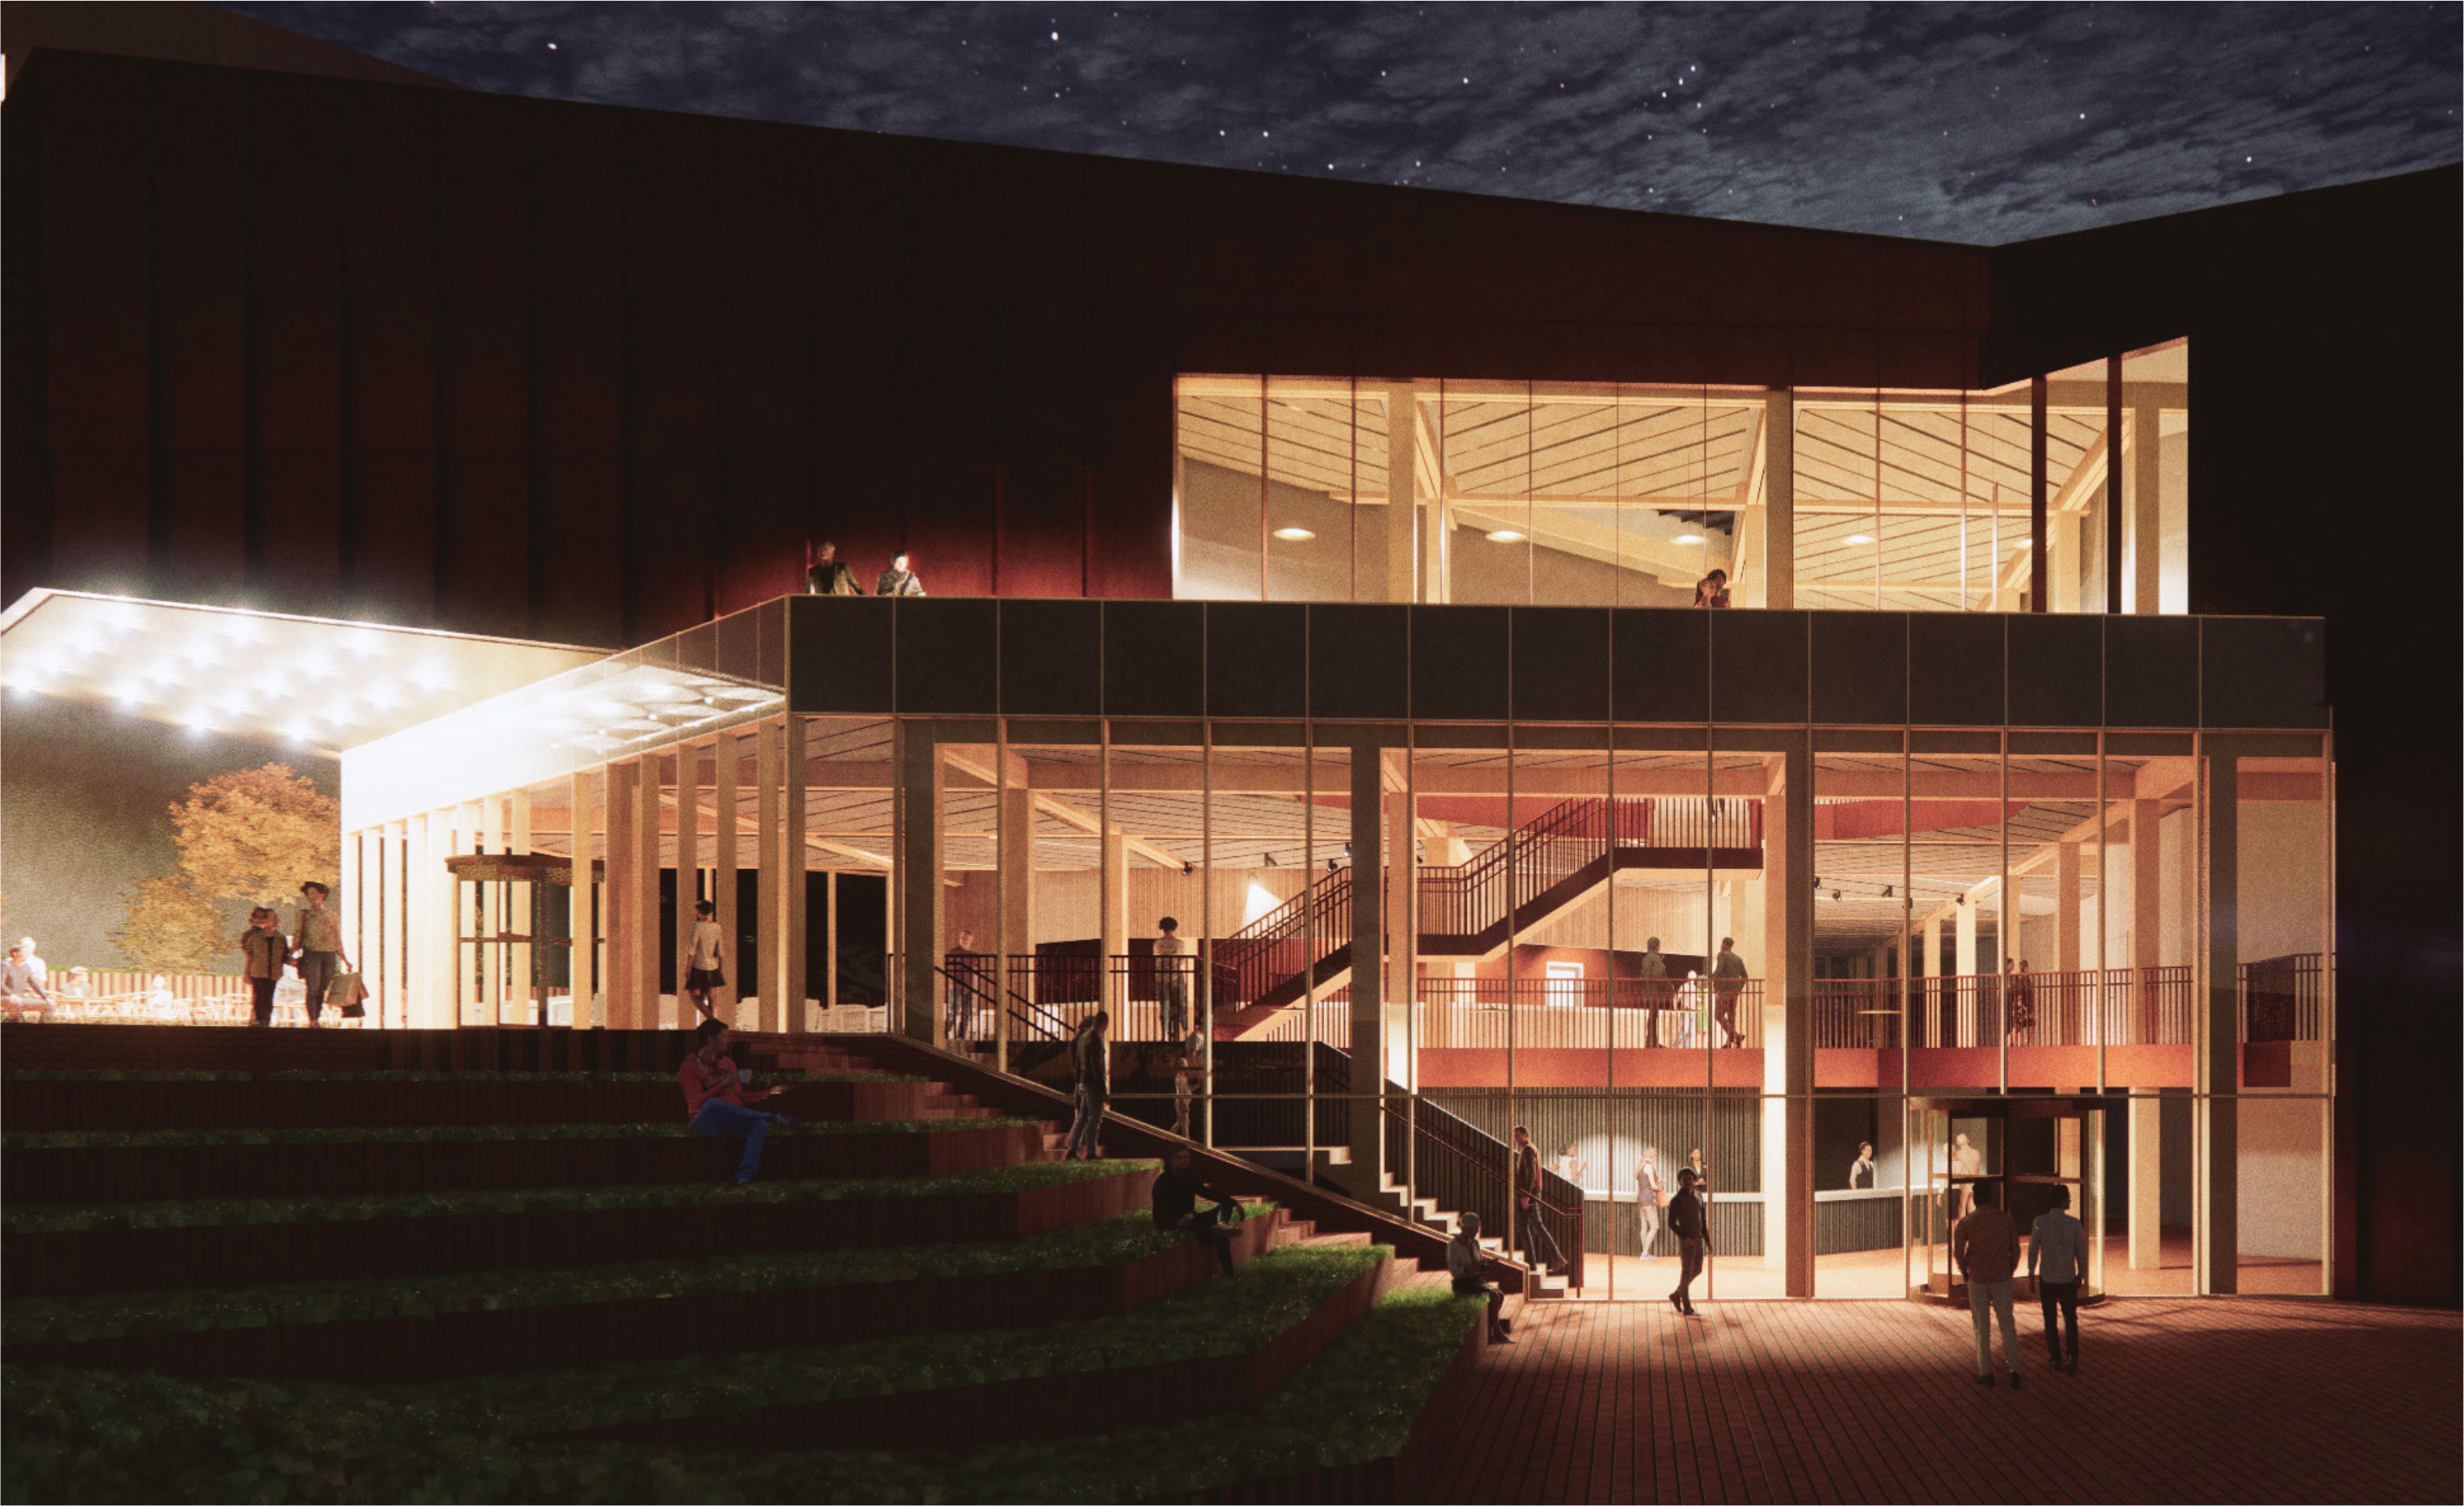 An artists impression of outside the redeveloped Octagon Theatre at night.